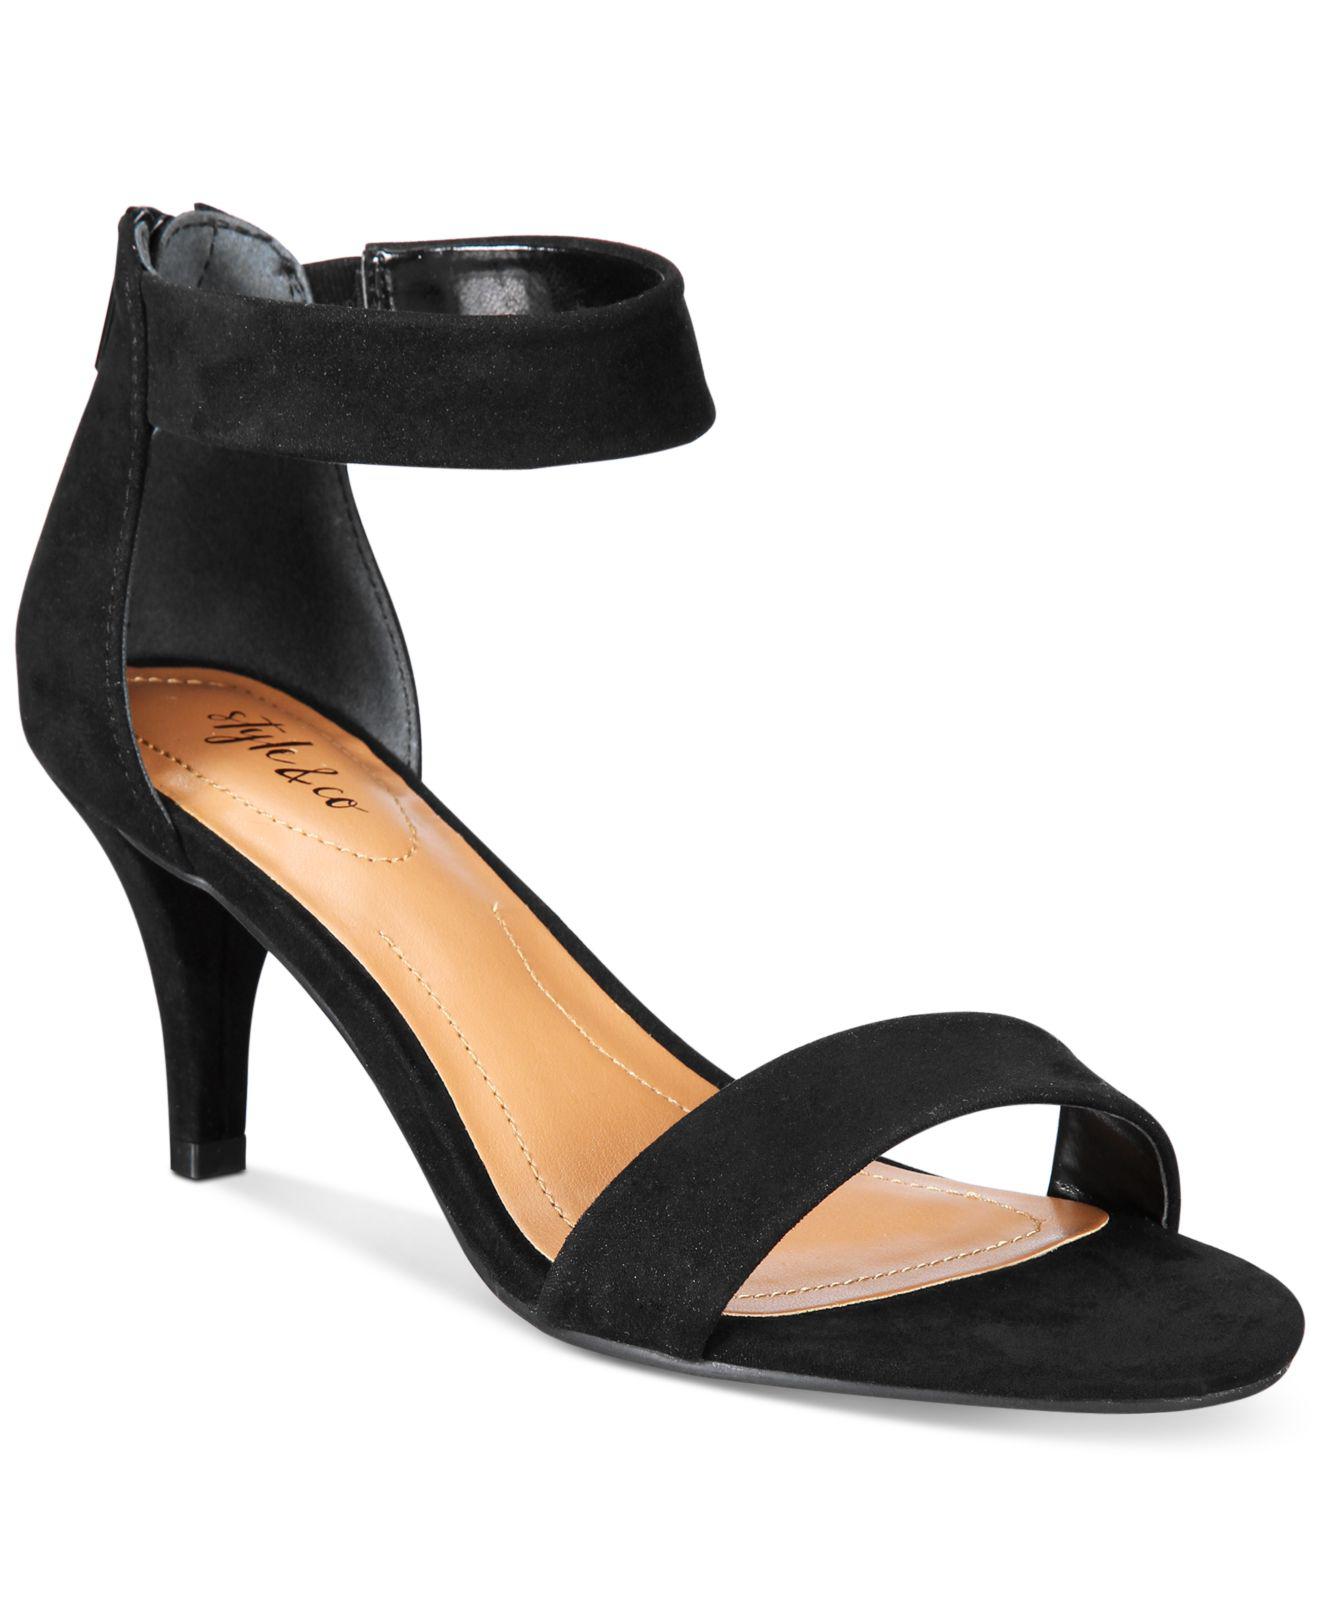 Lyst - Style & co. Paycee Two-piece Dress Sandals in Black